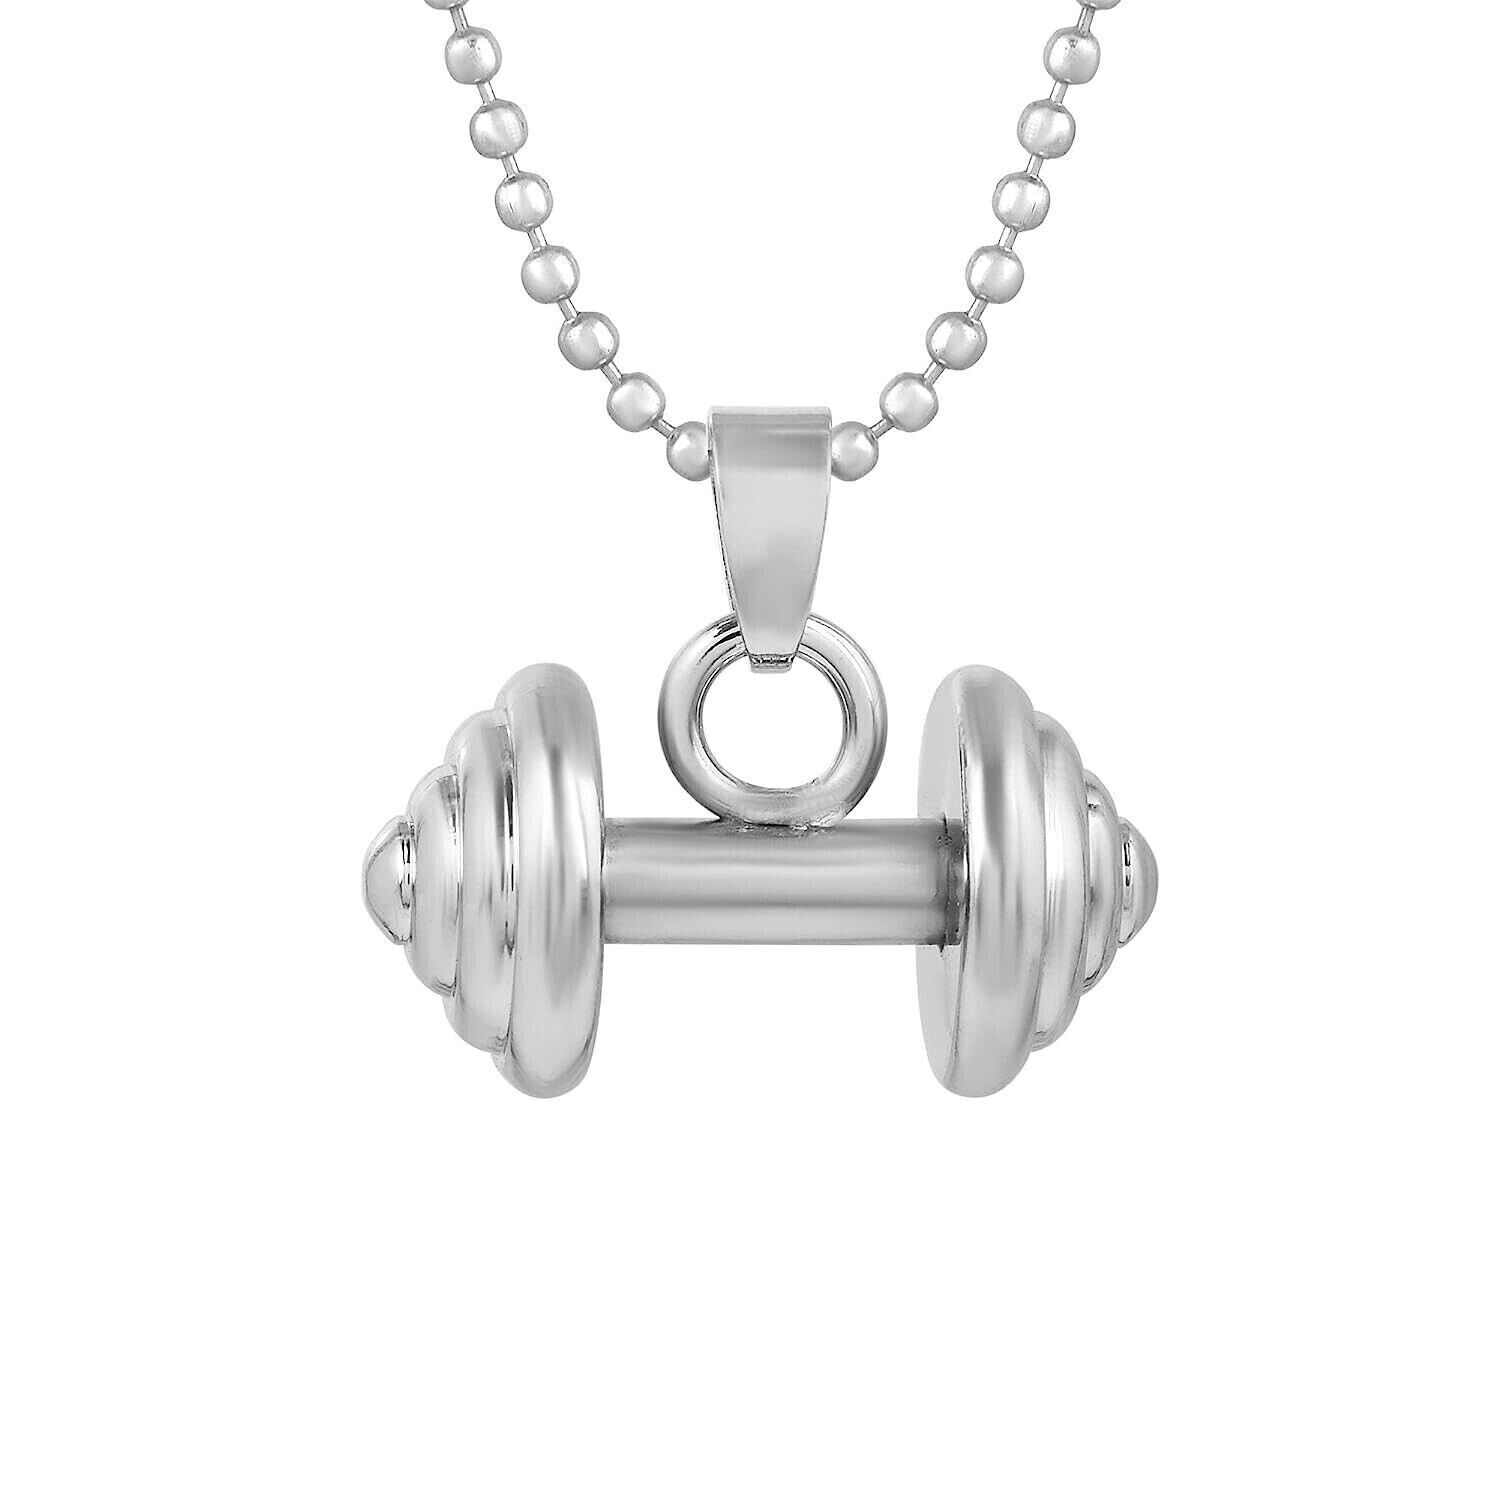 Stainless Steel Fitness Bodybuilding Barbell Dumbbell Gym Cross Workout Pendant